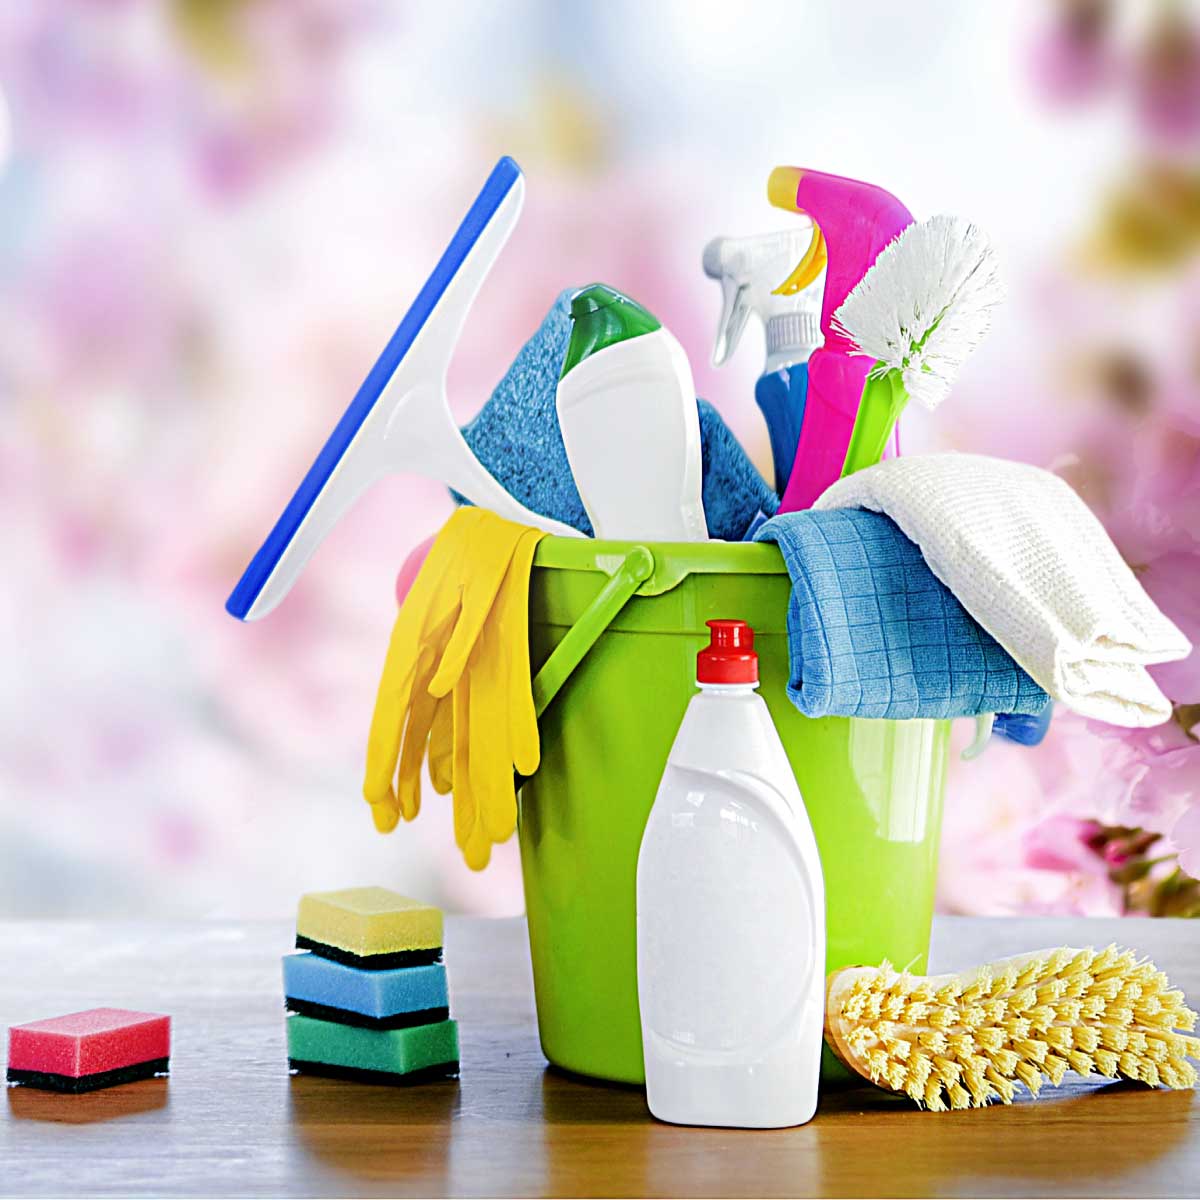 Spring Cleaning for Your Sales & Marketing